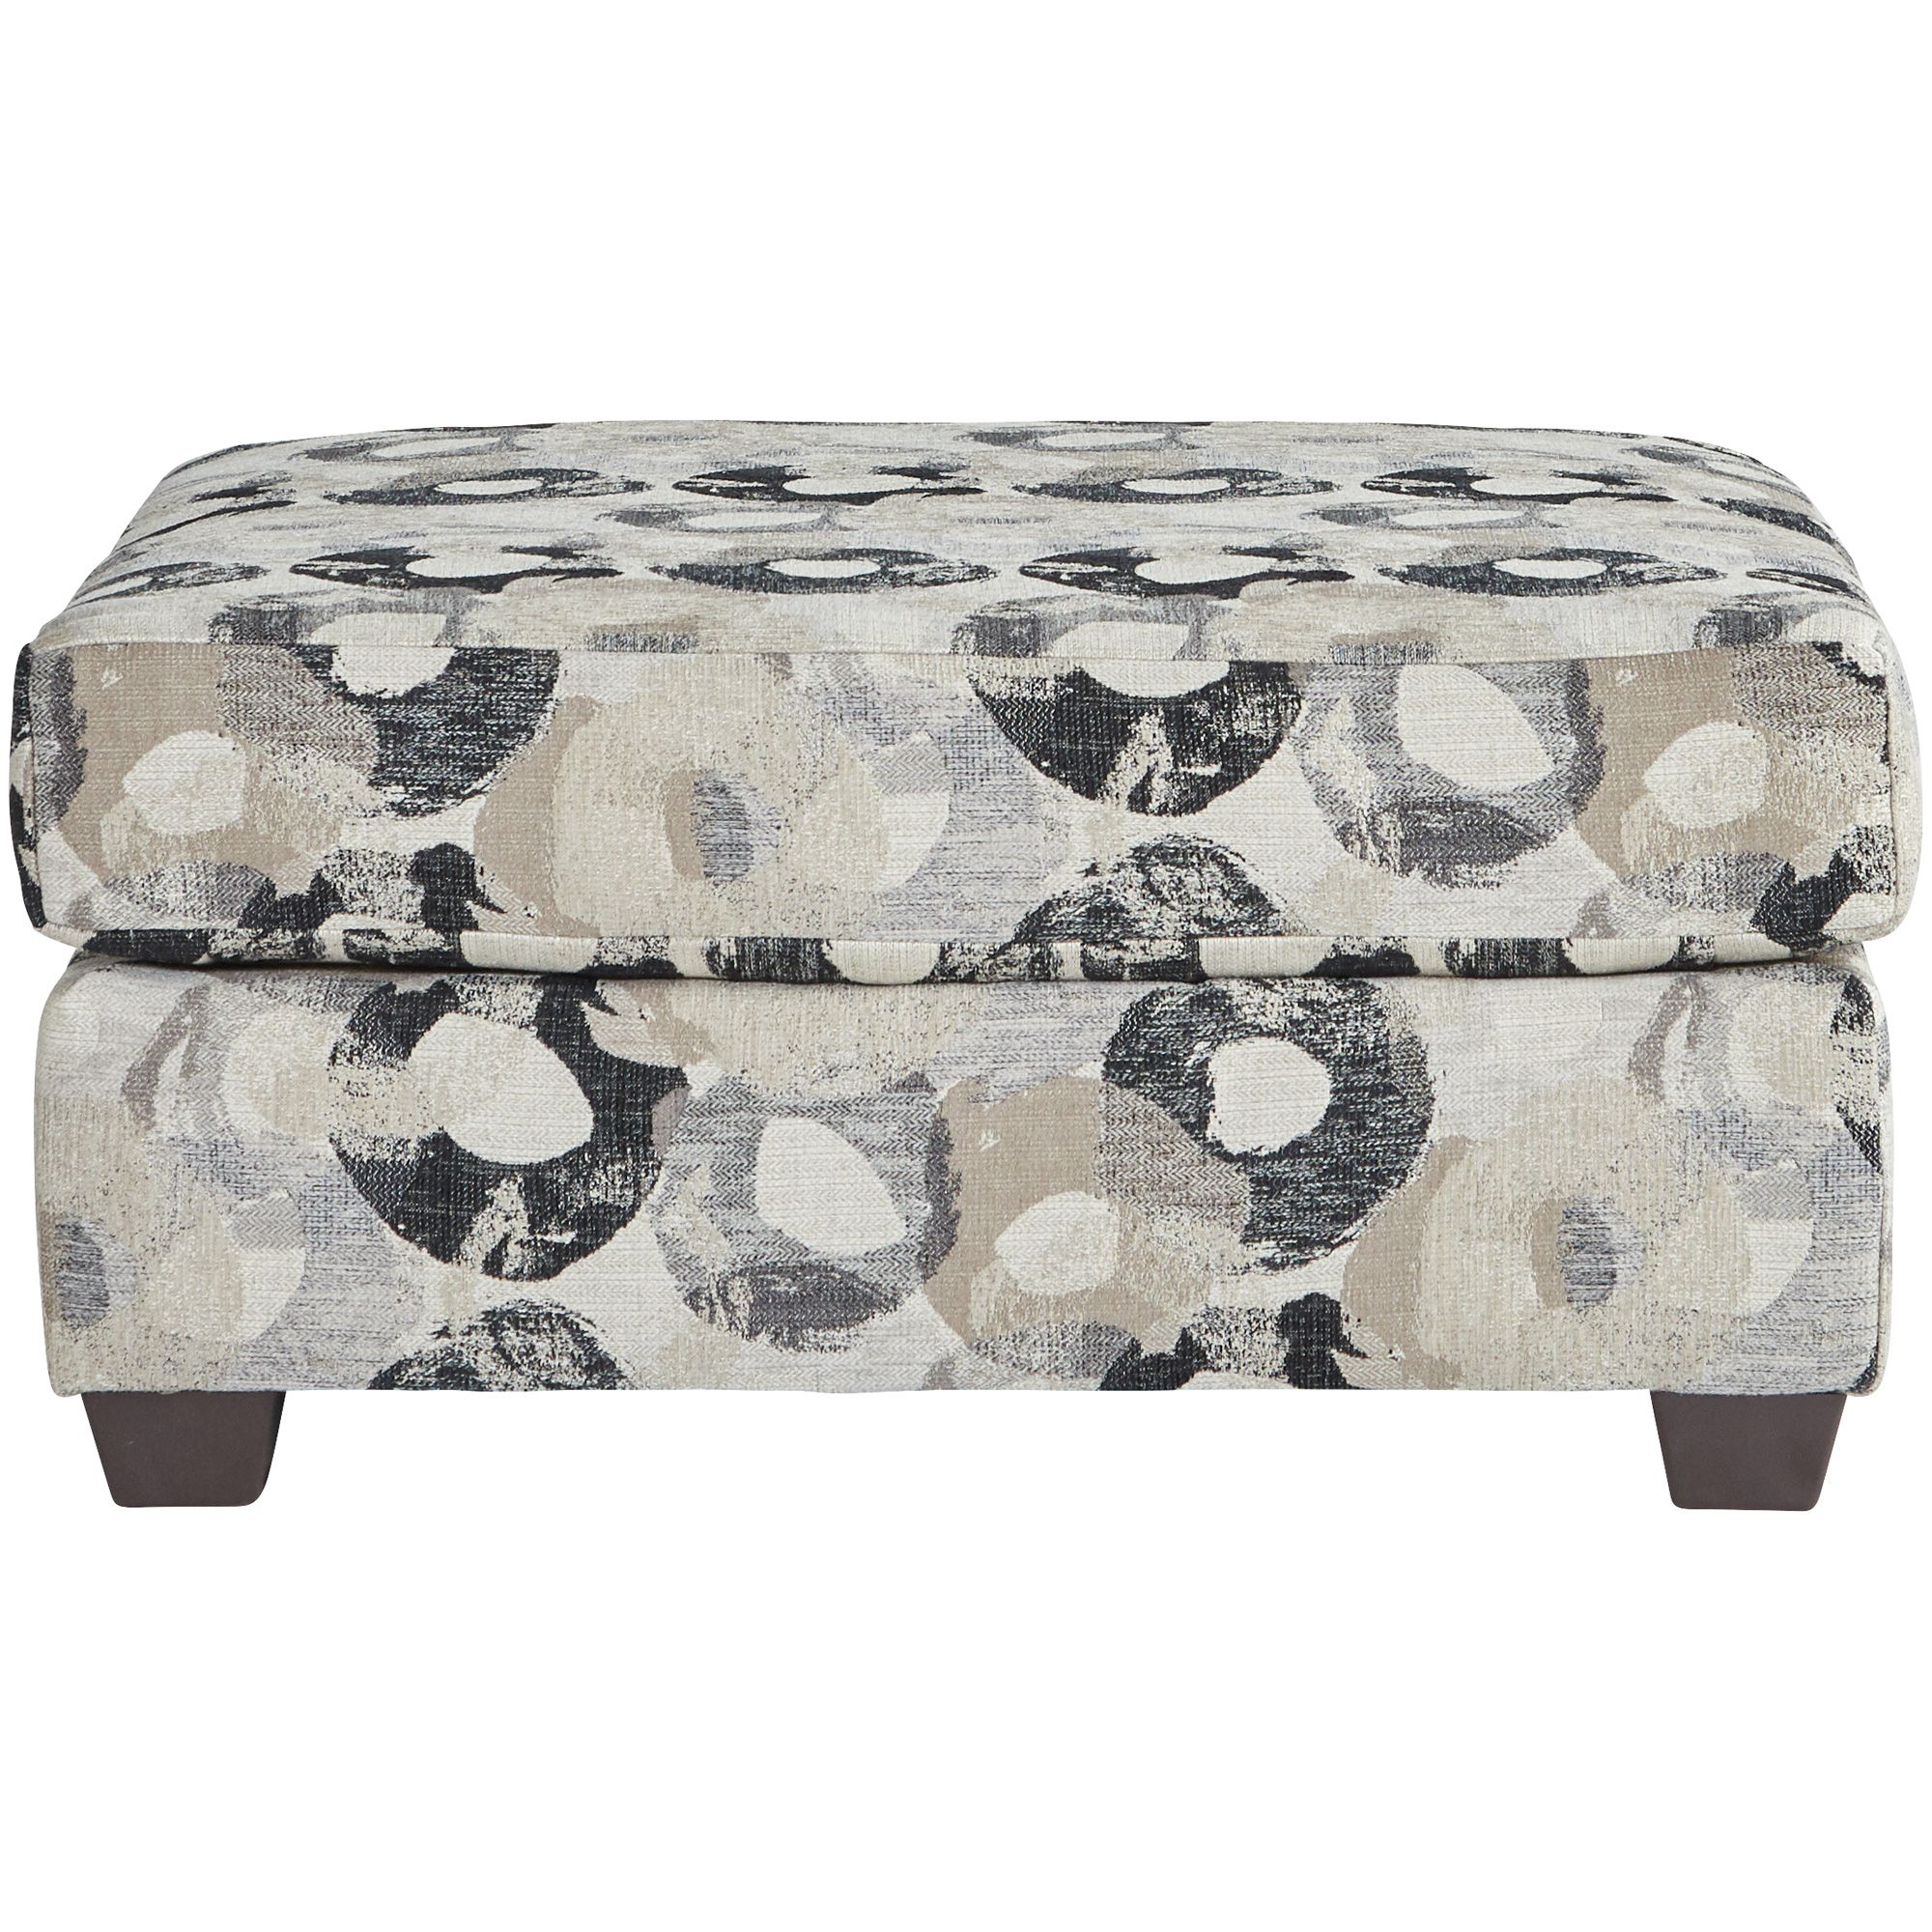 Accuweather Shop In Ivory And Blue Ottomans (View 10 of 15)